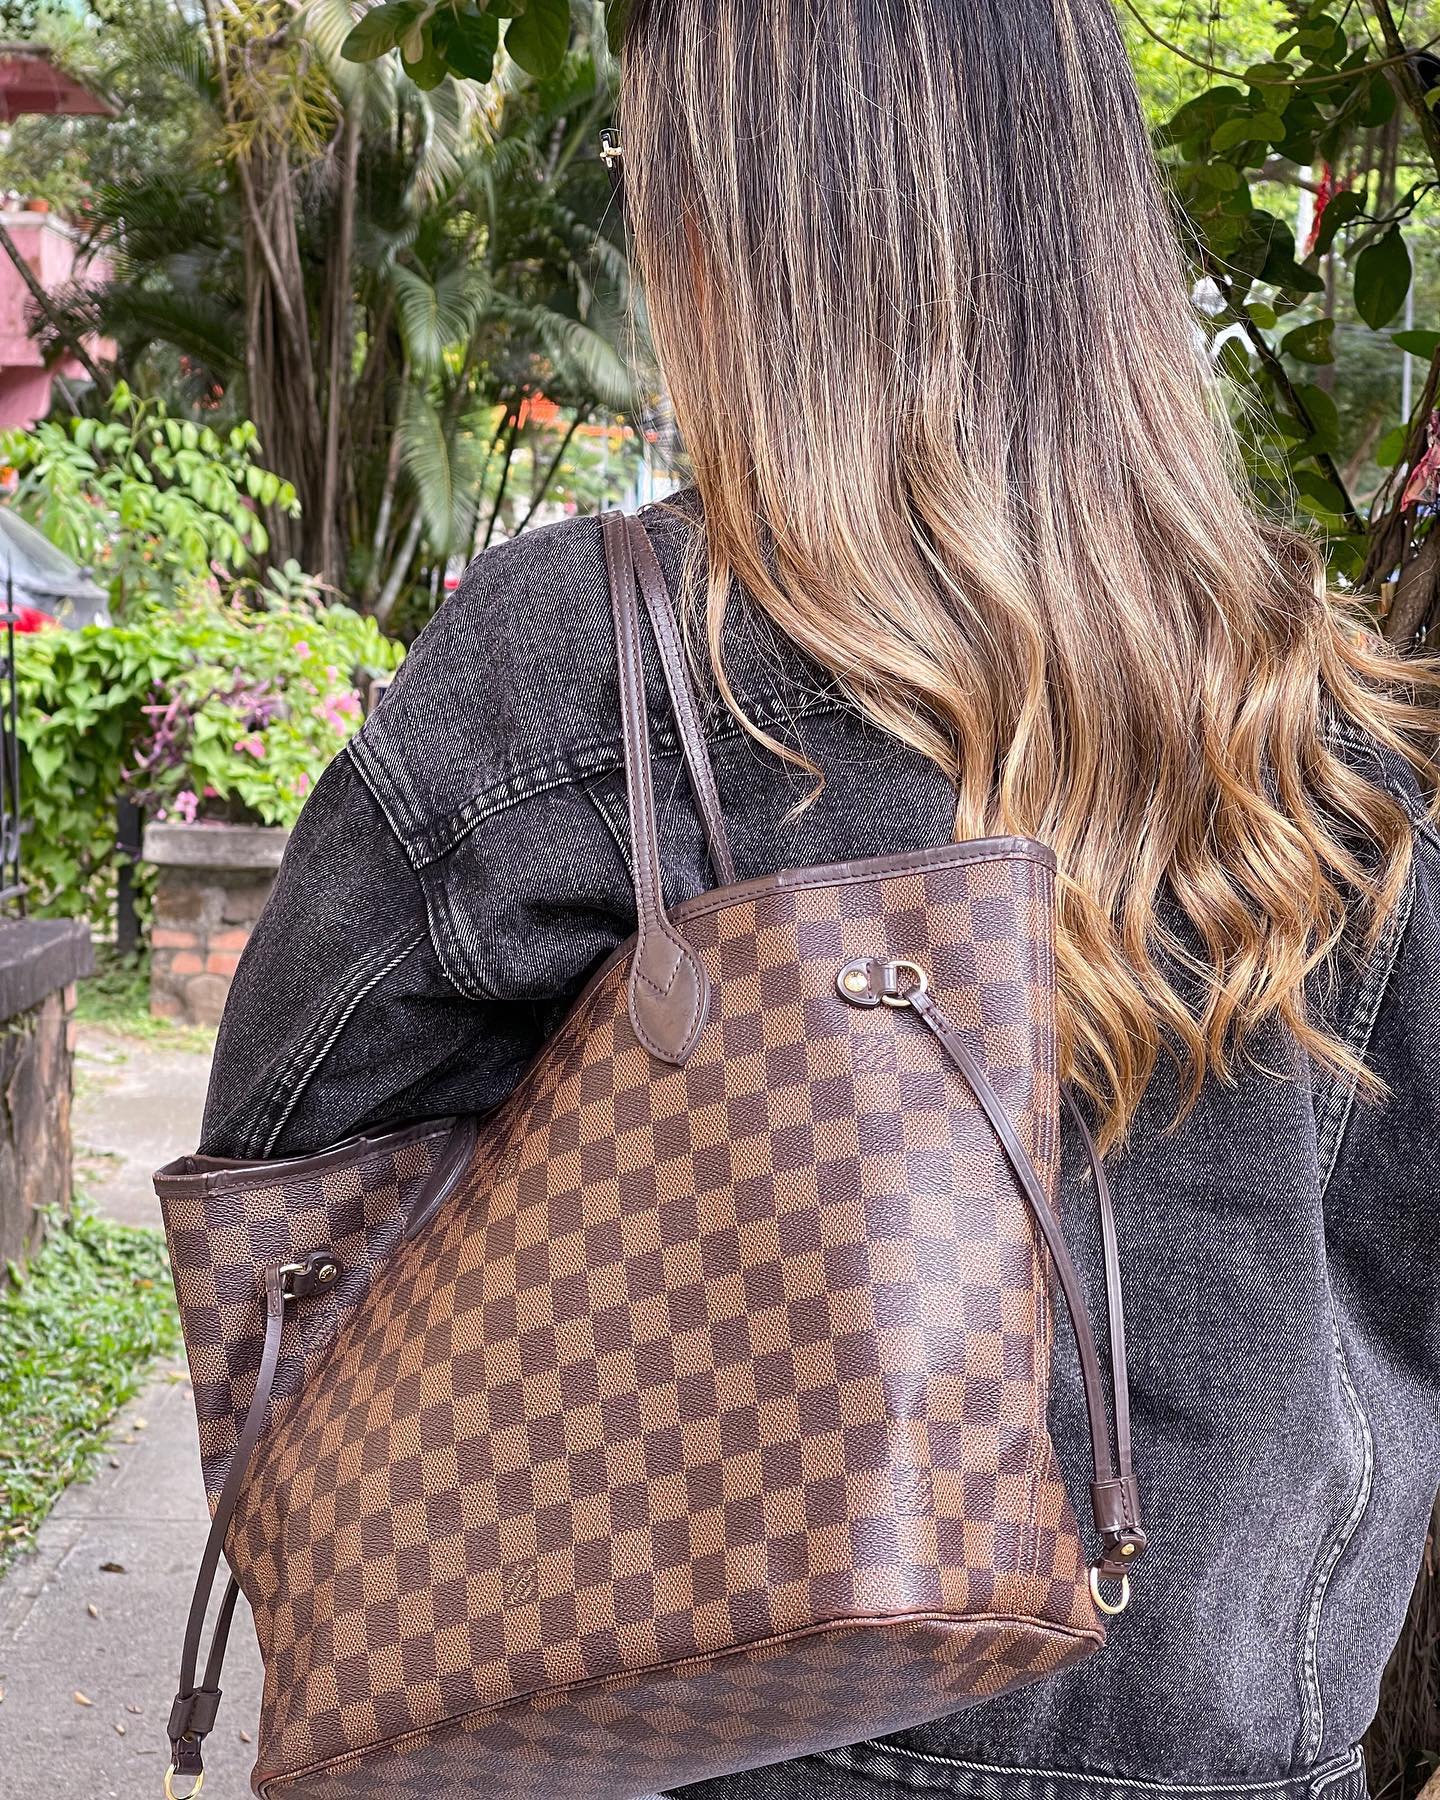 Happiness is .. a new dream bag💘
⠀⠀⠀⠀⠀⠀⠀⠀⠀
Shop #LouisVuitton and more at our web: shopgoturbag.com.
.
#GotUrBag #GUB #GUBbies #WeGotUrBag #LuxuryConsignment #OnlyAuthentic